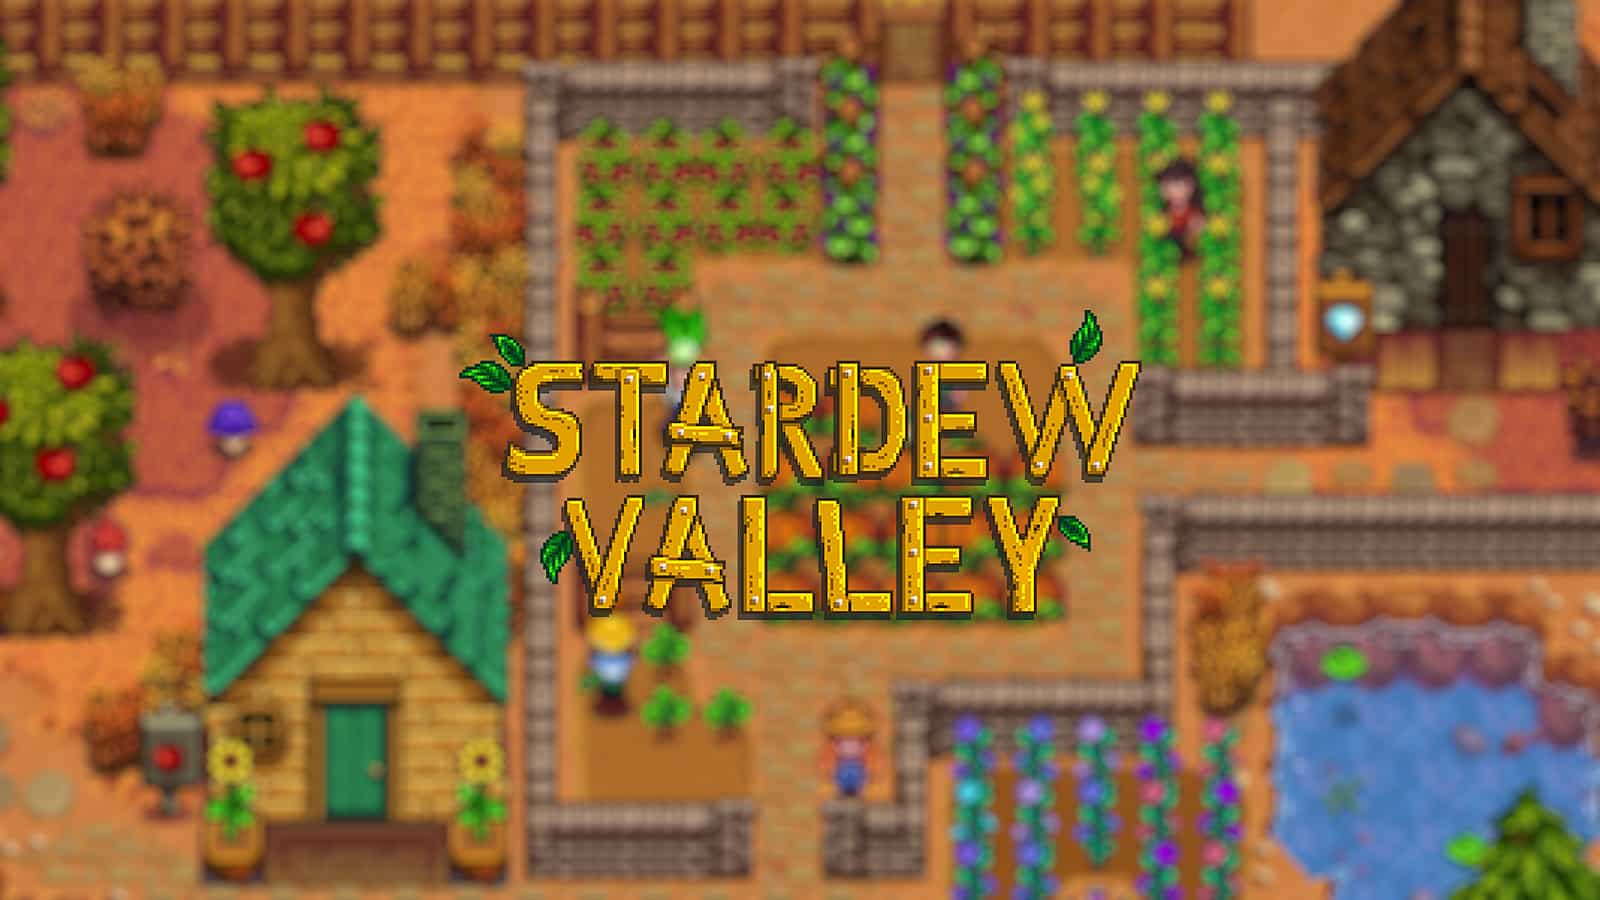 Stardew Valley - Multiplayer Troubleshooting Guide